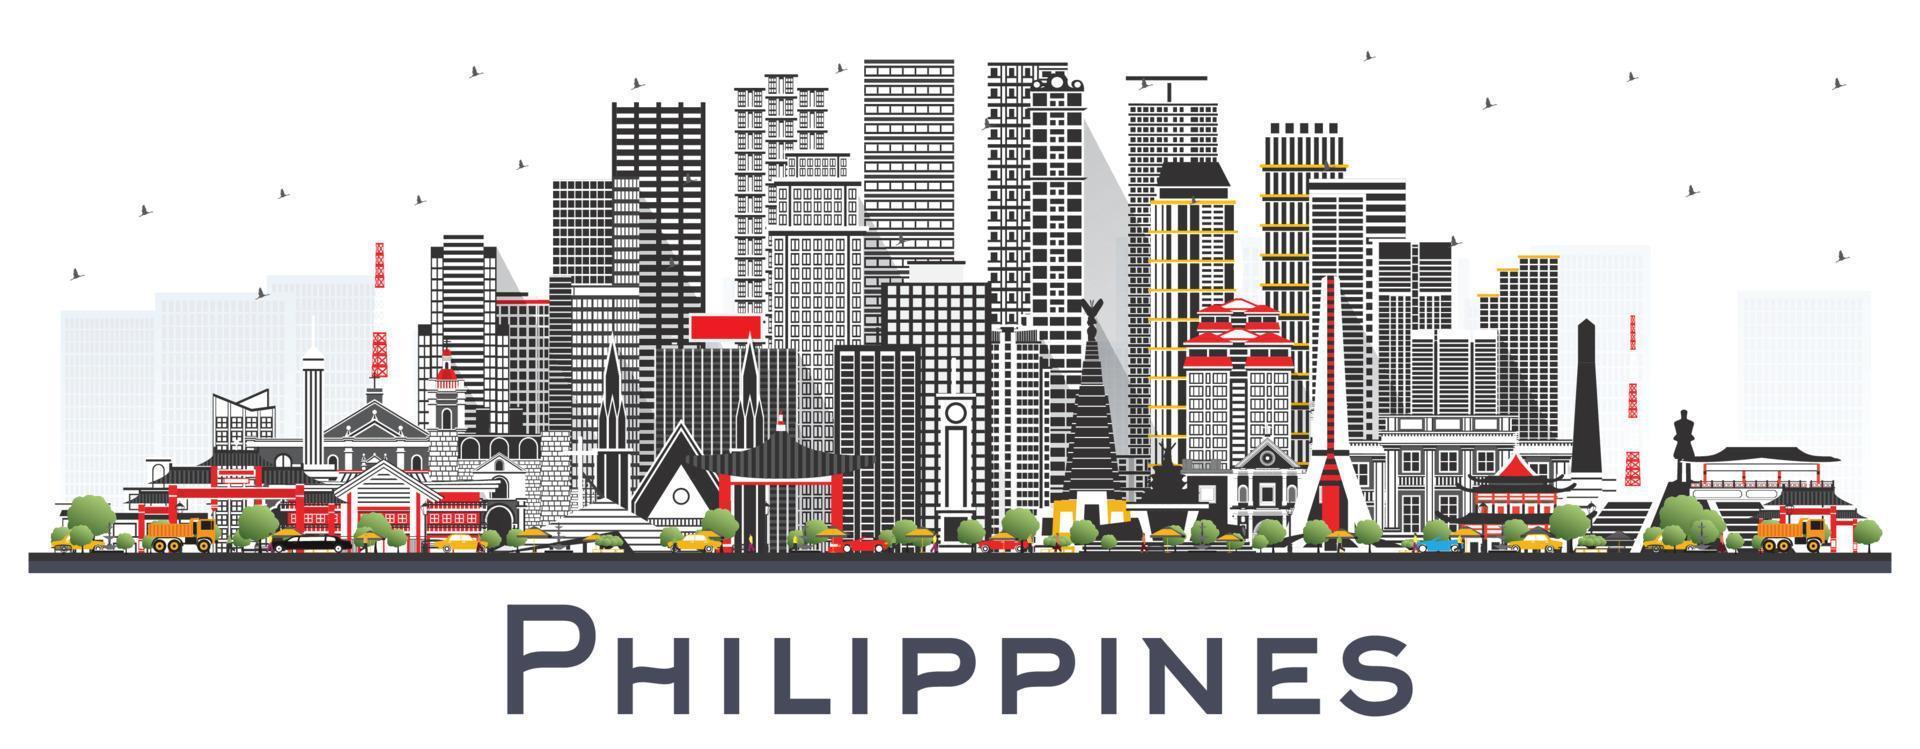 Philippines City Skyline with Gray Buildings Isolated on White. vector